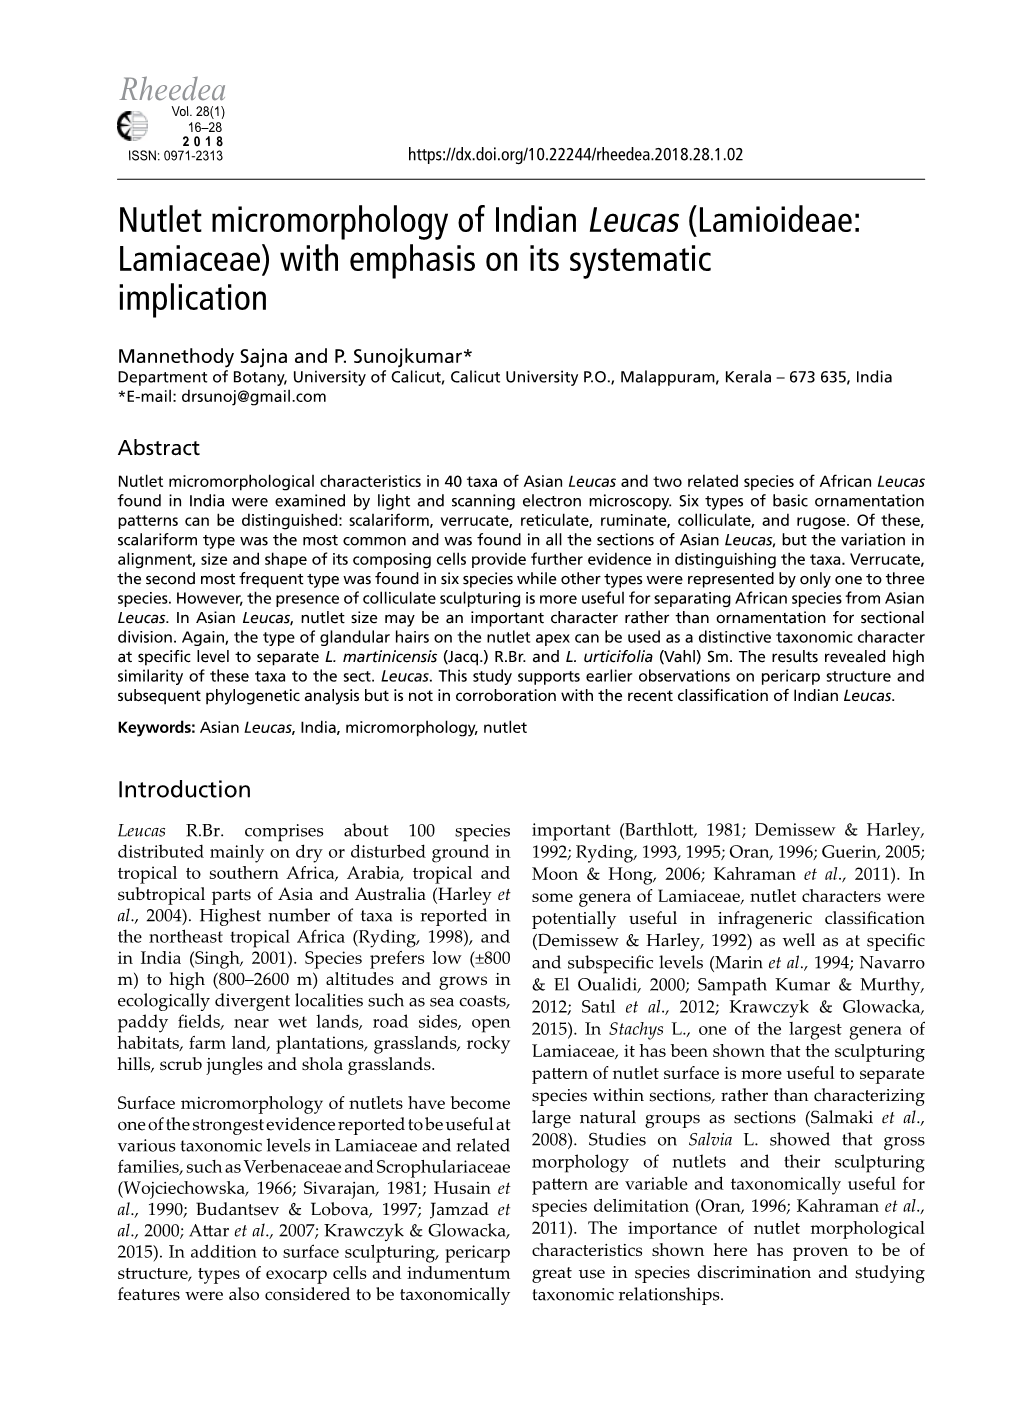 Nutlet Micromorphology of Indian Leucas (Lamioideae: Lamiaceae) with Emphasis on Its Systematic Implication